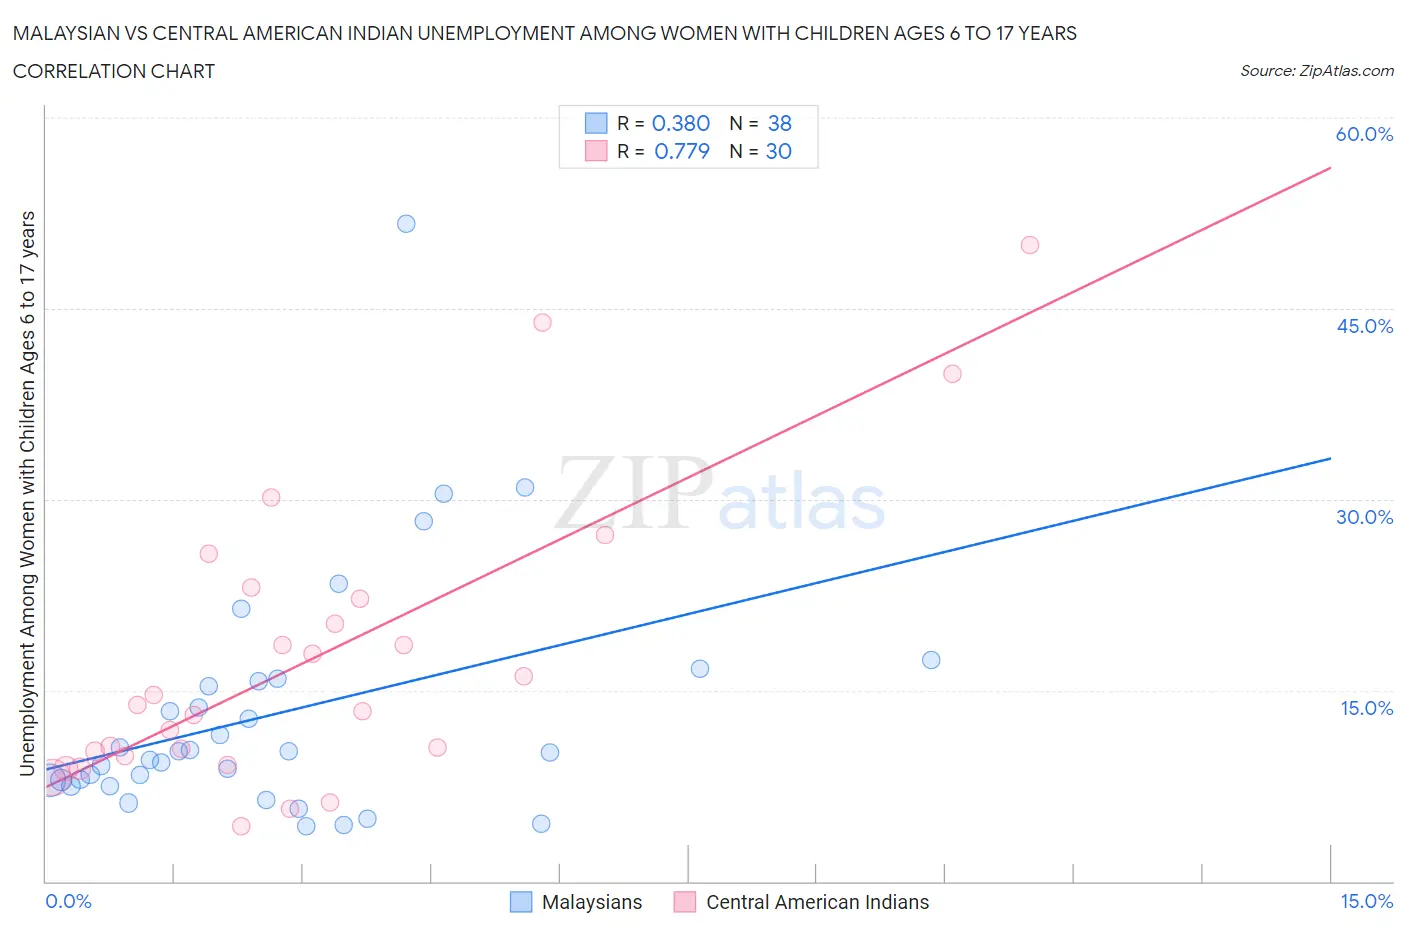 Malaysian vs Central American Indian Unemployment Among Women with Children Ages 6 to 17 years